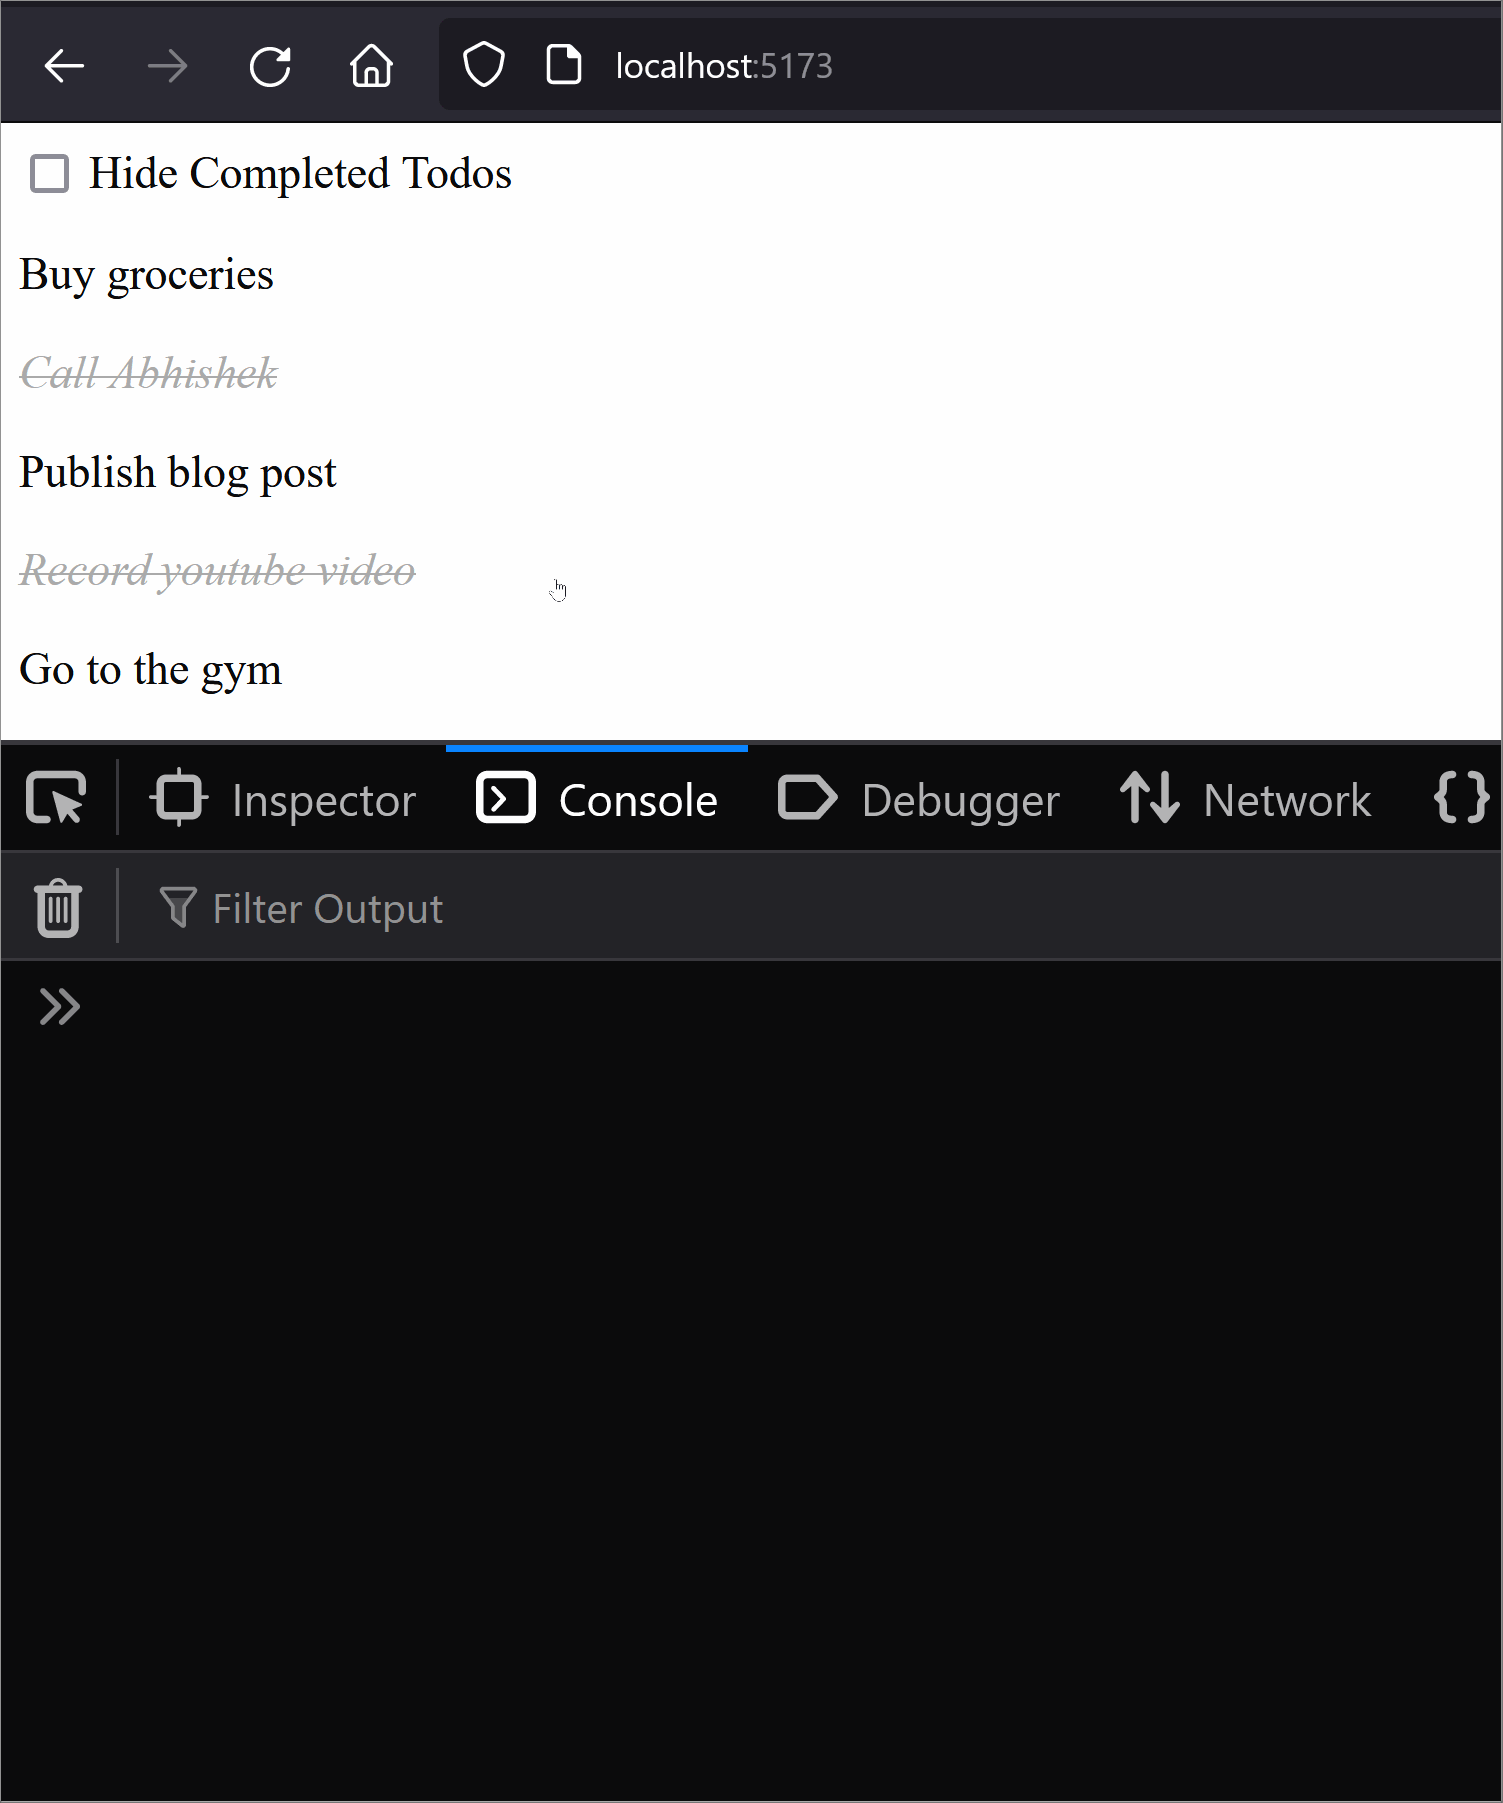 browser screencast demonstrating how clicking on a todo unnecessarily causes the TodoFilter component to re-render and show a message in the console logs.